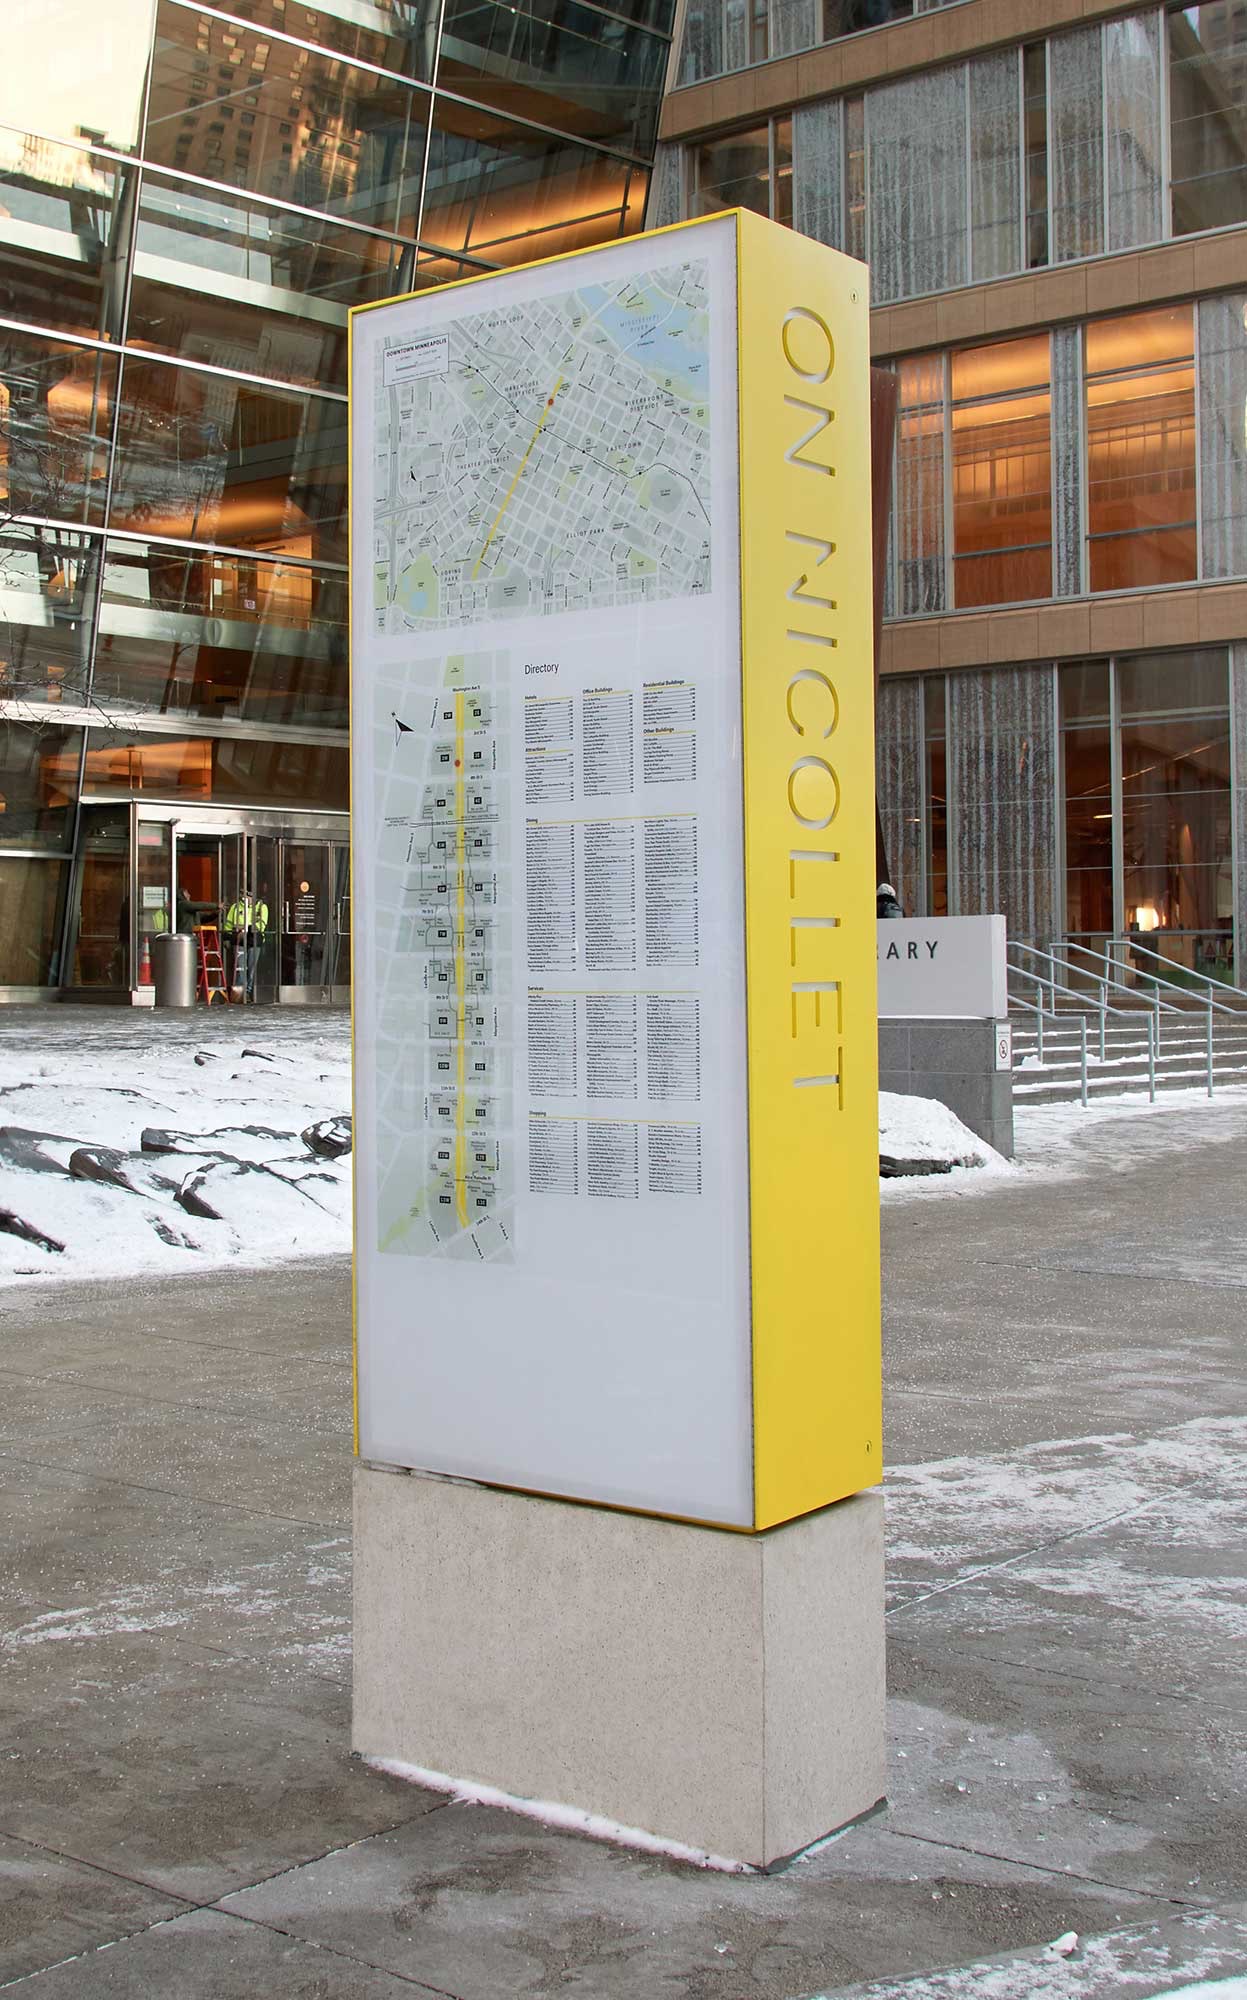 Graphic identity, signage and wayfinding by Pentagram's Paula Scher and team for Nicolett in Minneapolis